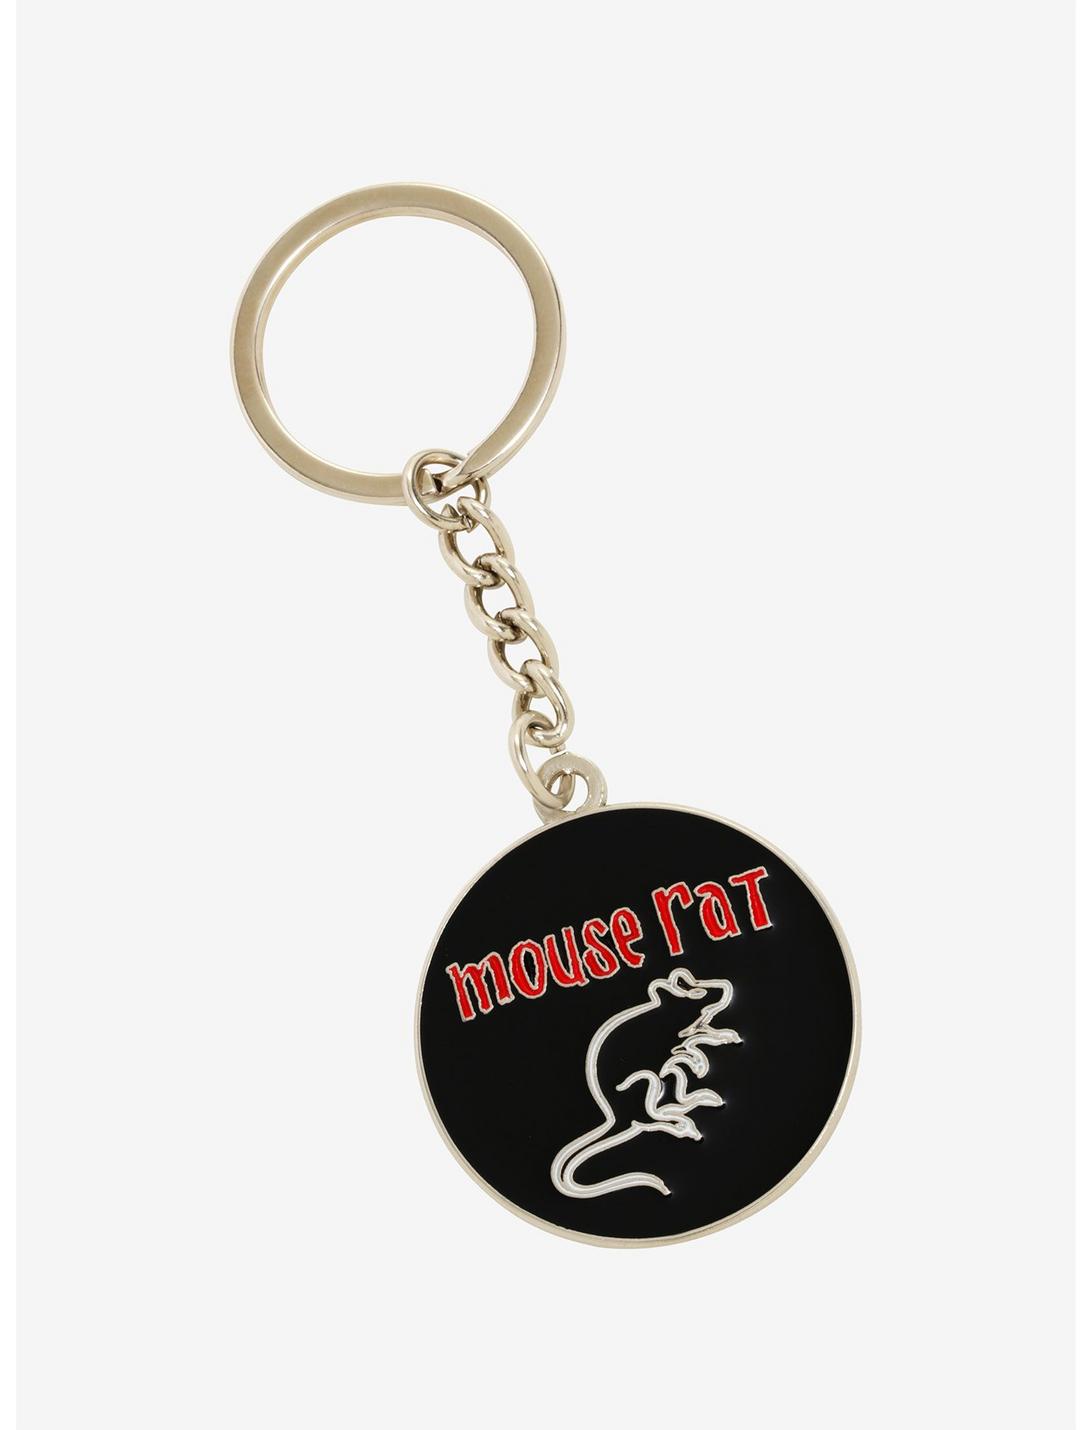 Parks And Recreation Mouse Rat Key Chain, , hi-res